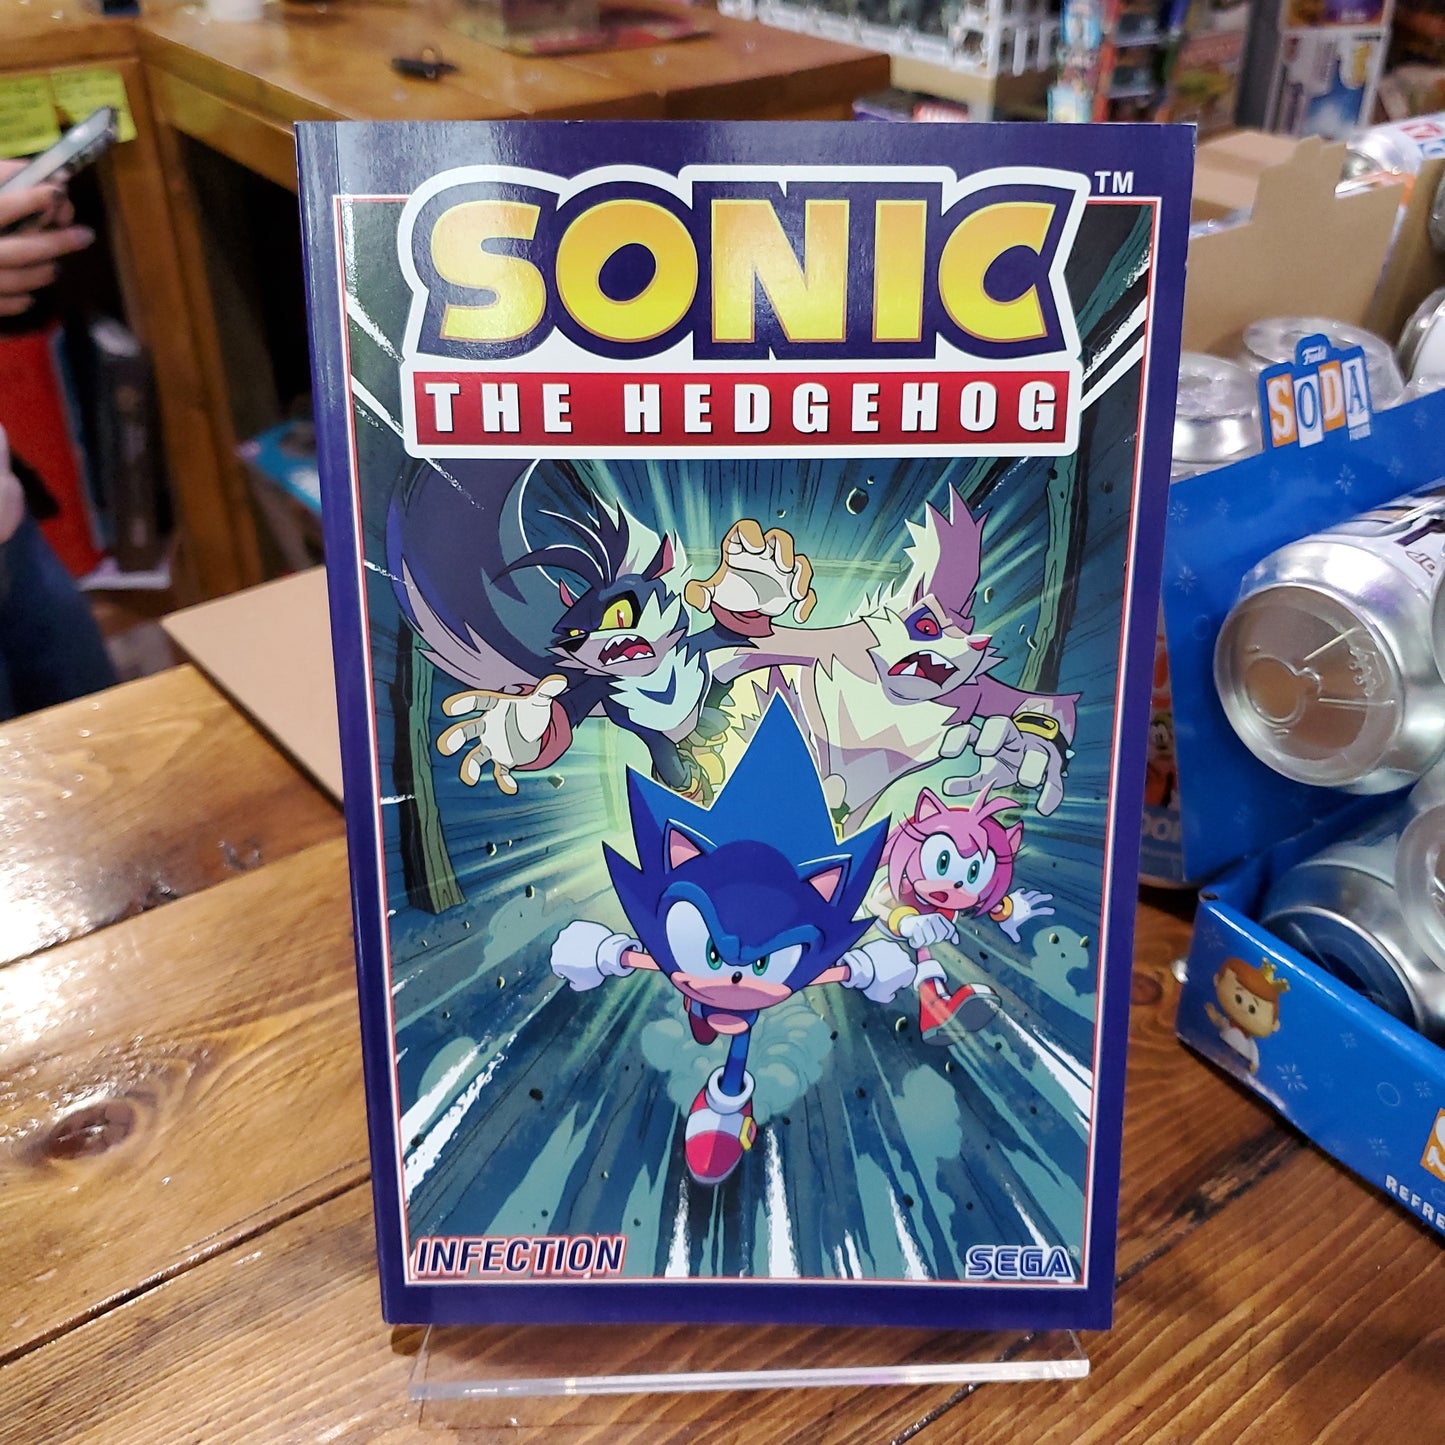 Sonic the Hedgehog: Infection vol 4